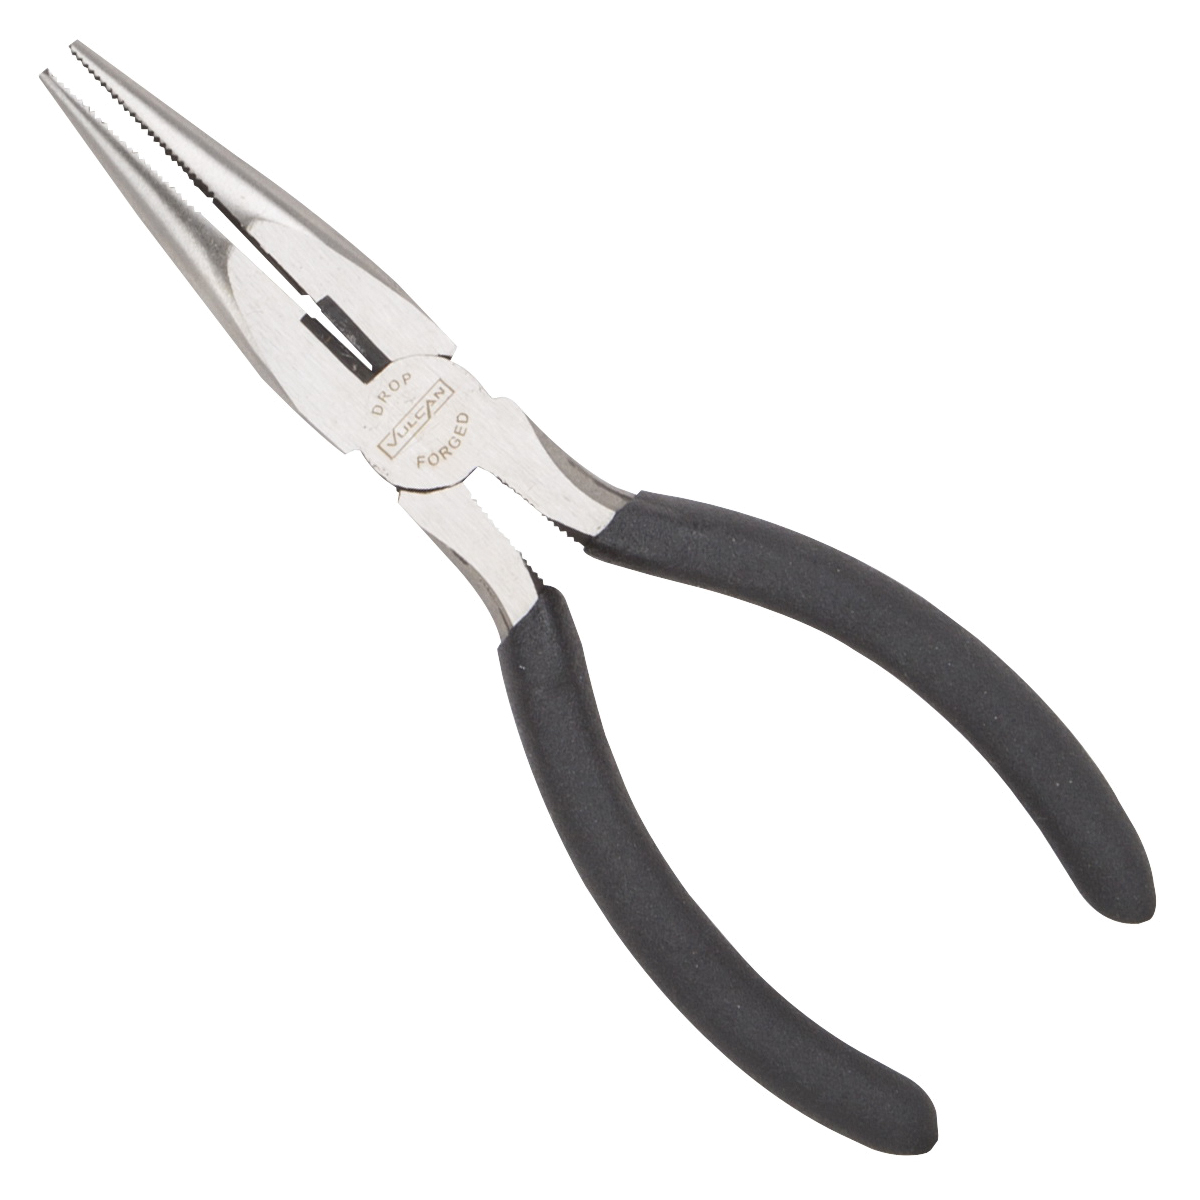 Vulcan JL-NP008 Plier, 6-1/2 in OAL, 1.6 mm Cutting Capacity, 3.9 cm Jaw Opening, Black Handle, 3/4 in W Jaw, 2 in L Jaw - 1